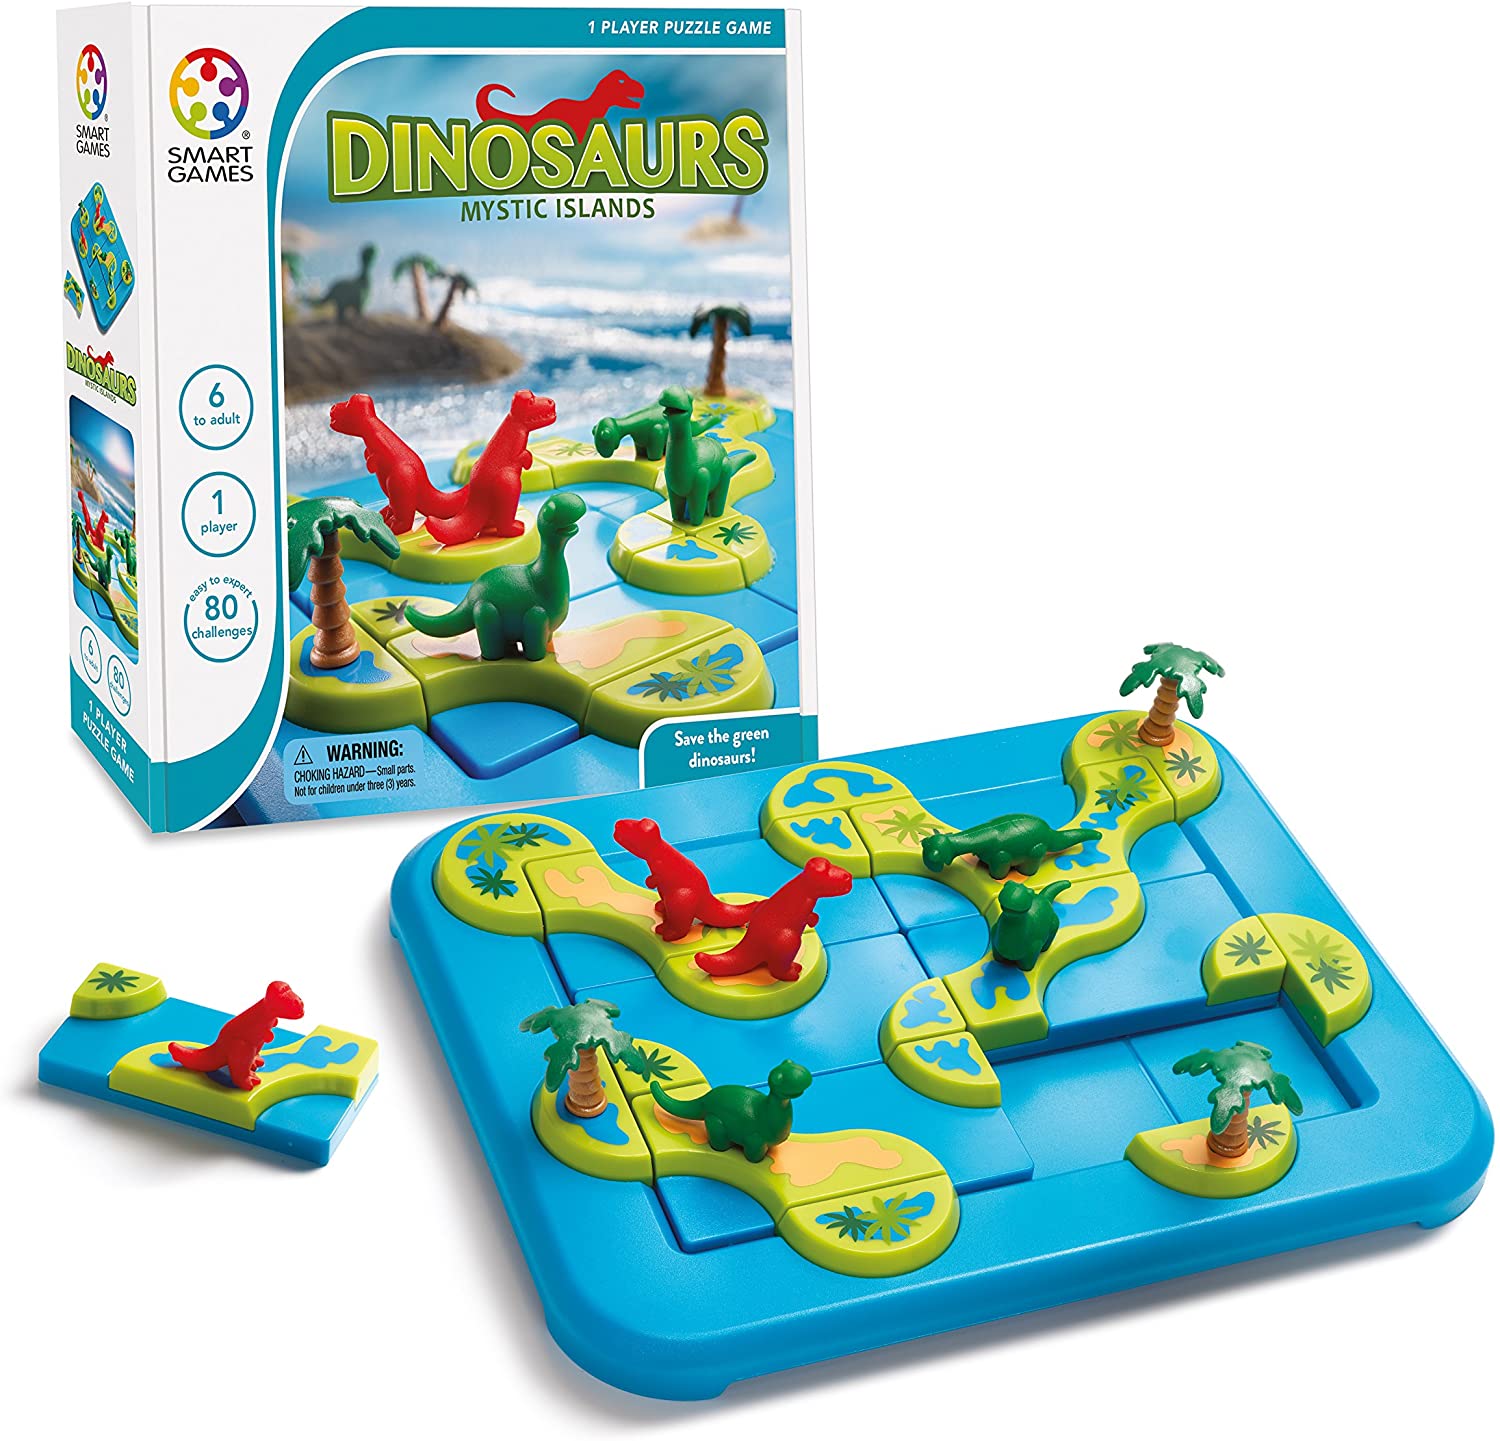 Smart Games Dinosaurs game